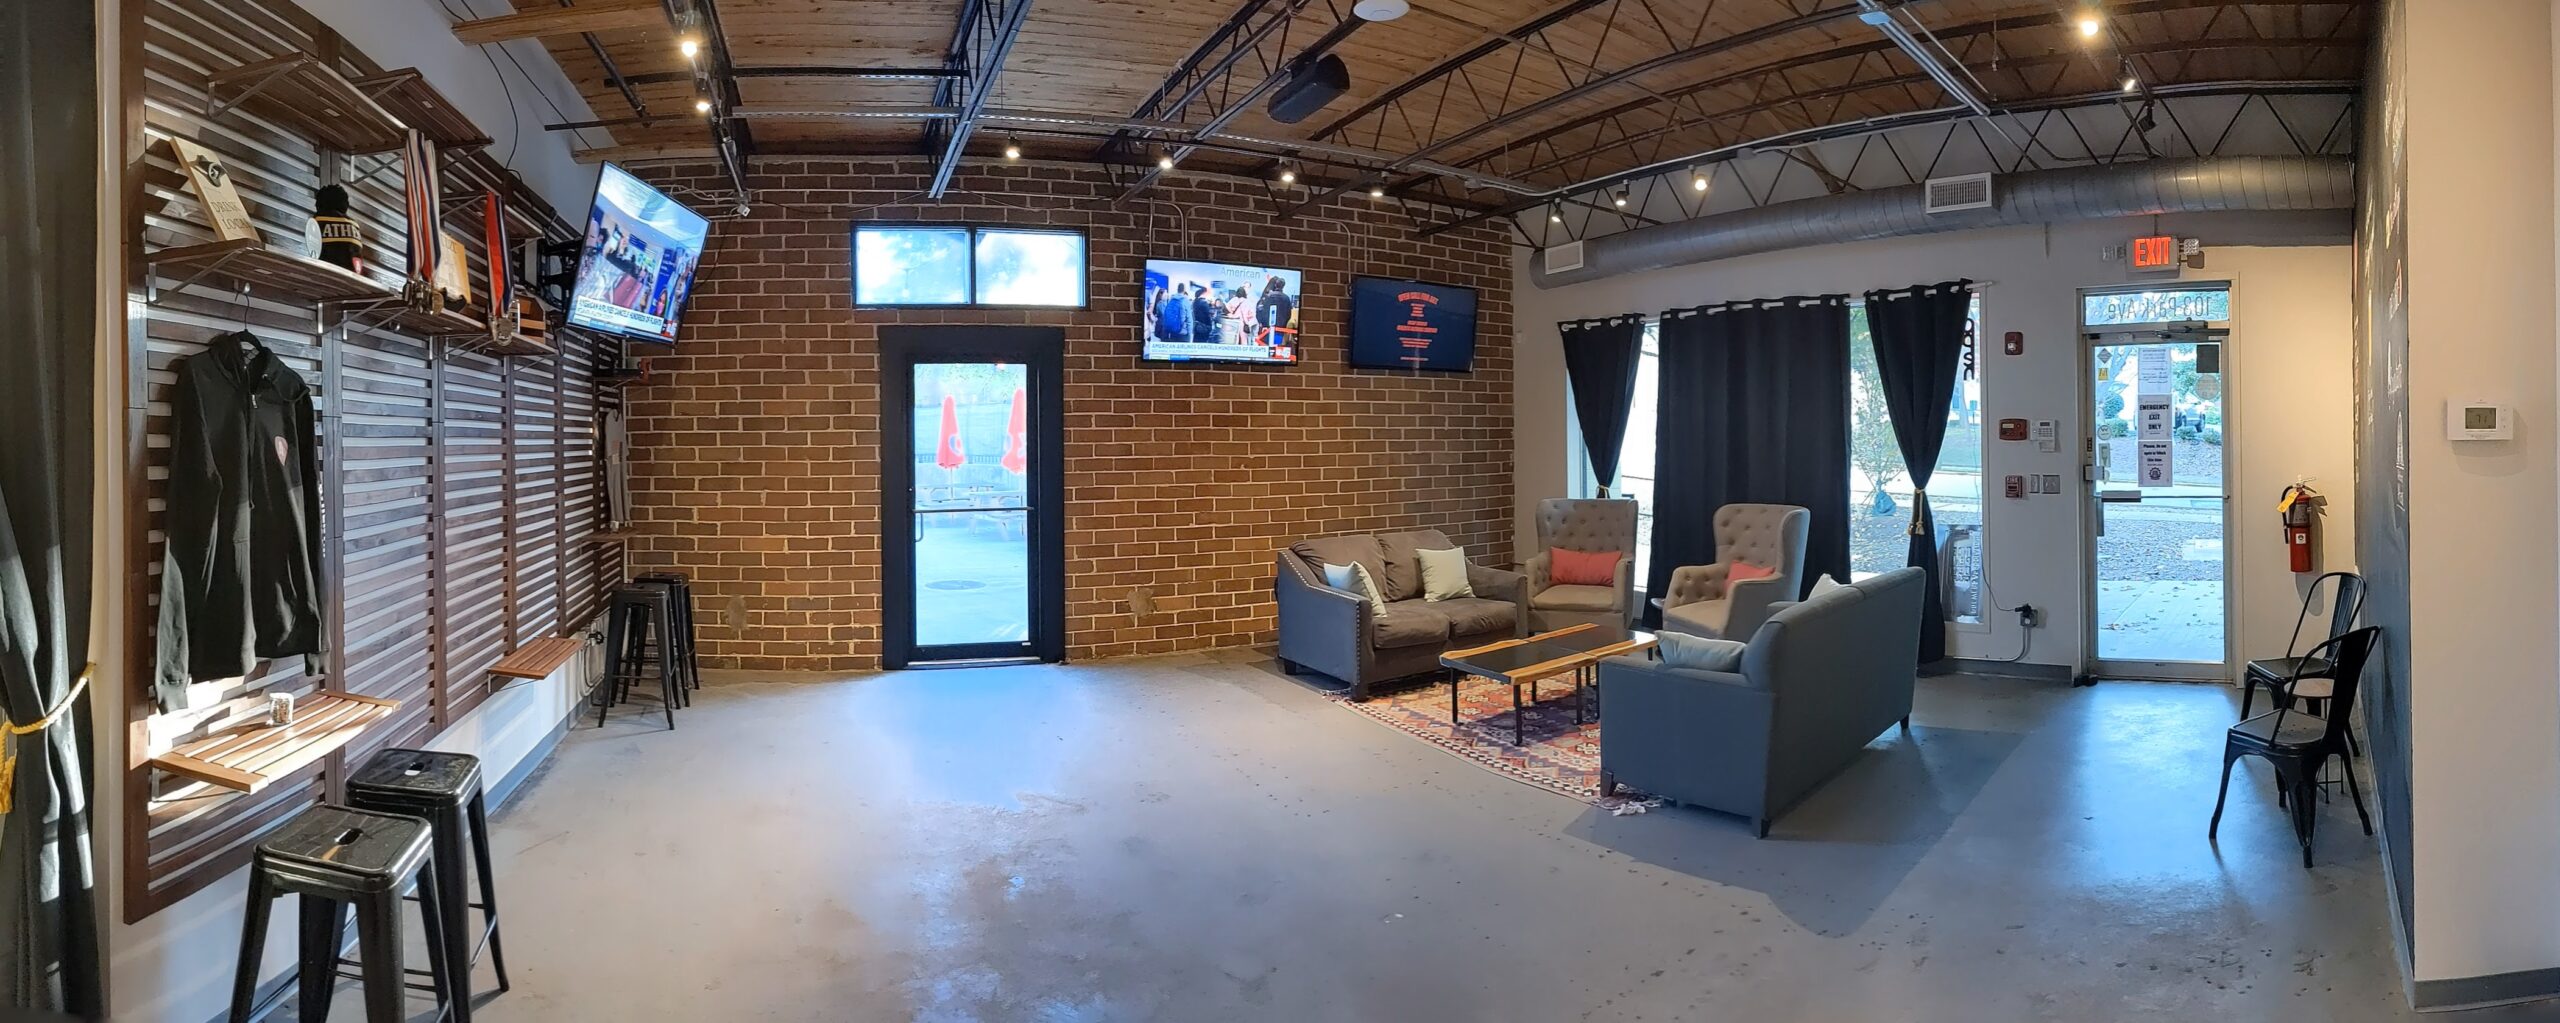 Interior of The Study event space at Athentic Brewing